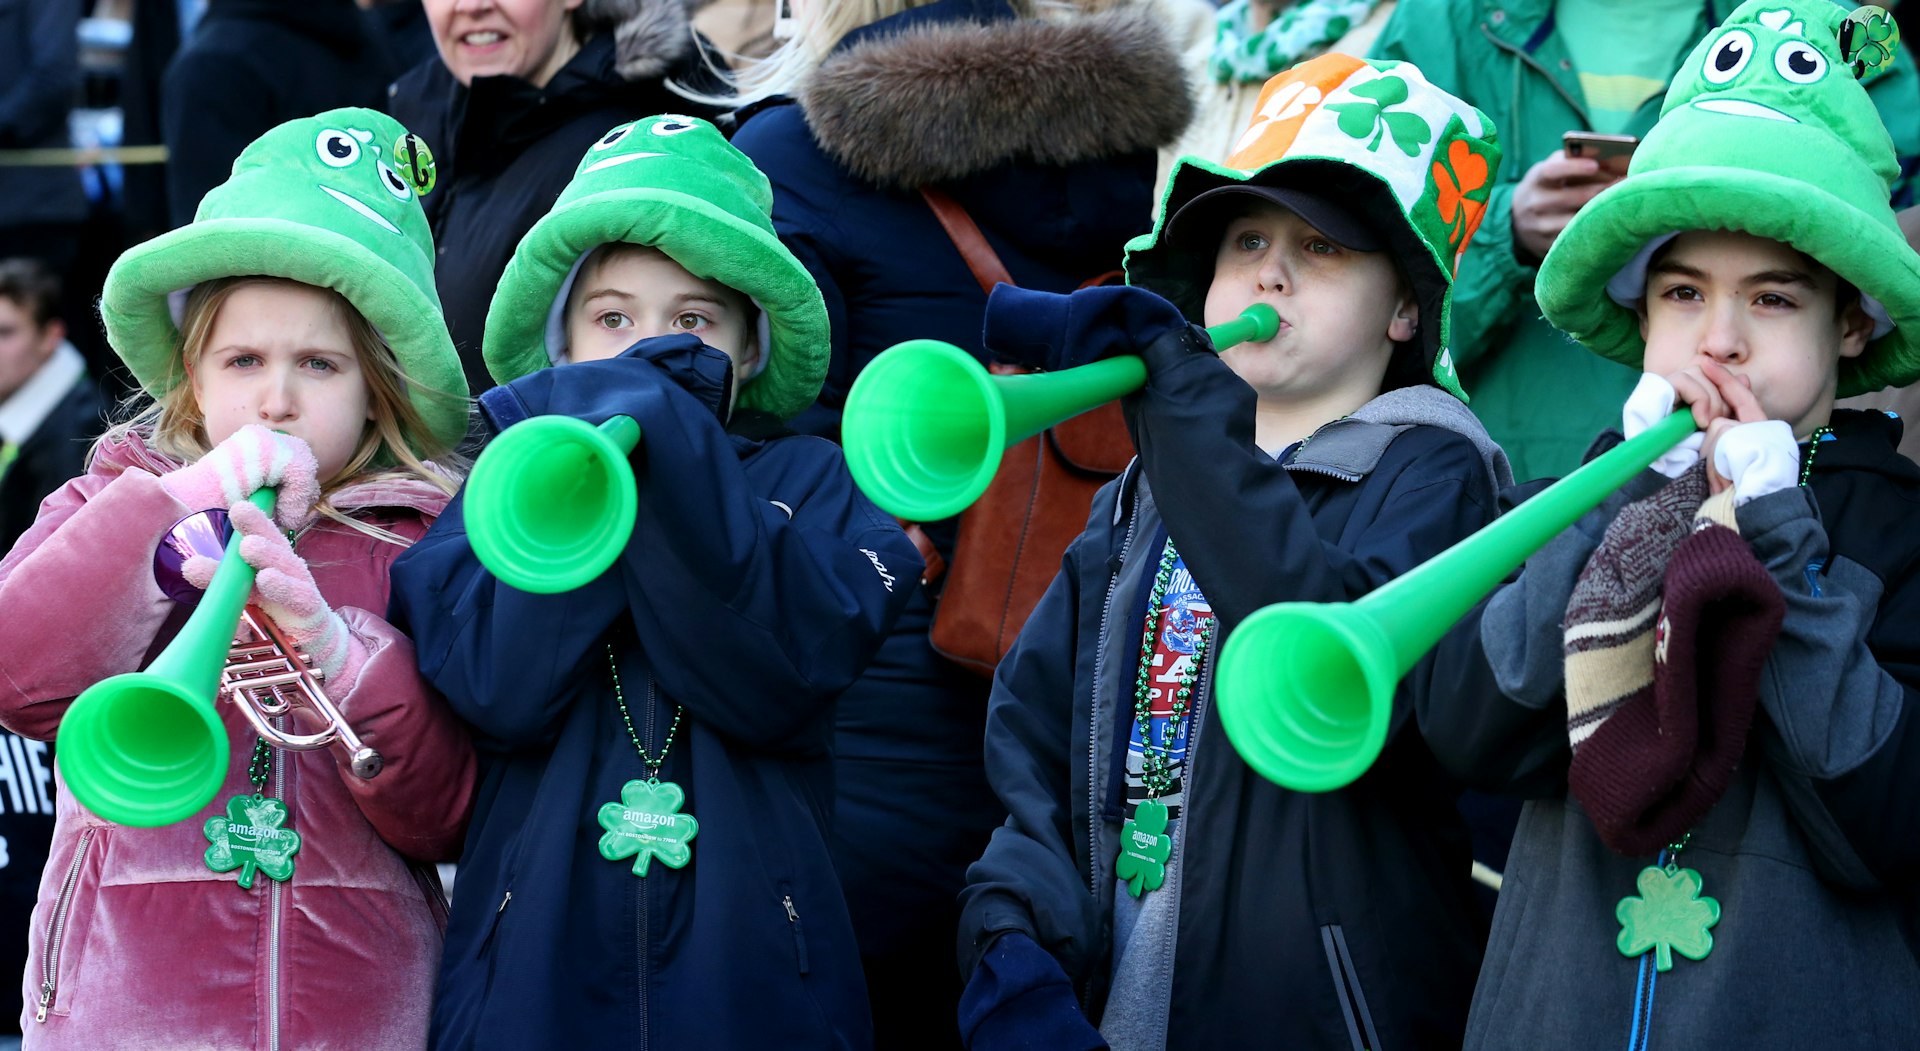 A group of young kids wearing bright green hats blow from green plastic horns during the St. Patrick's Day parade in Boston. 